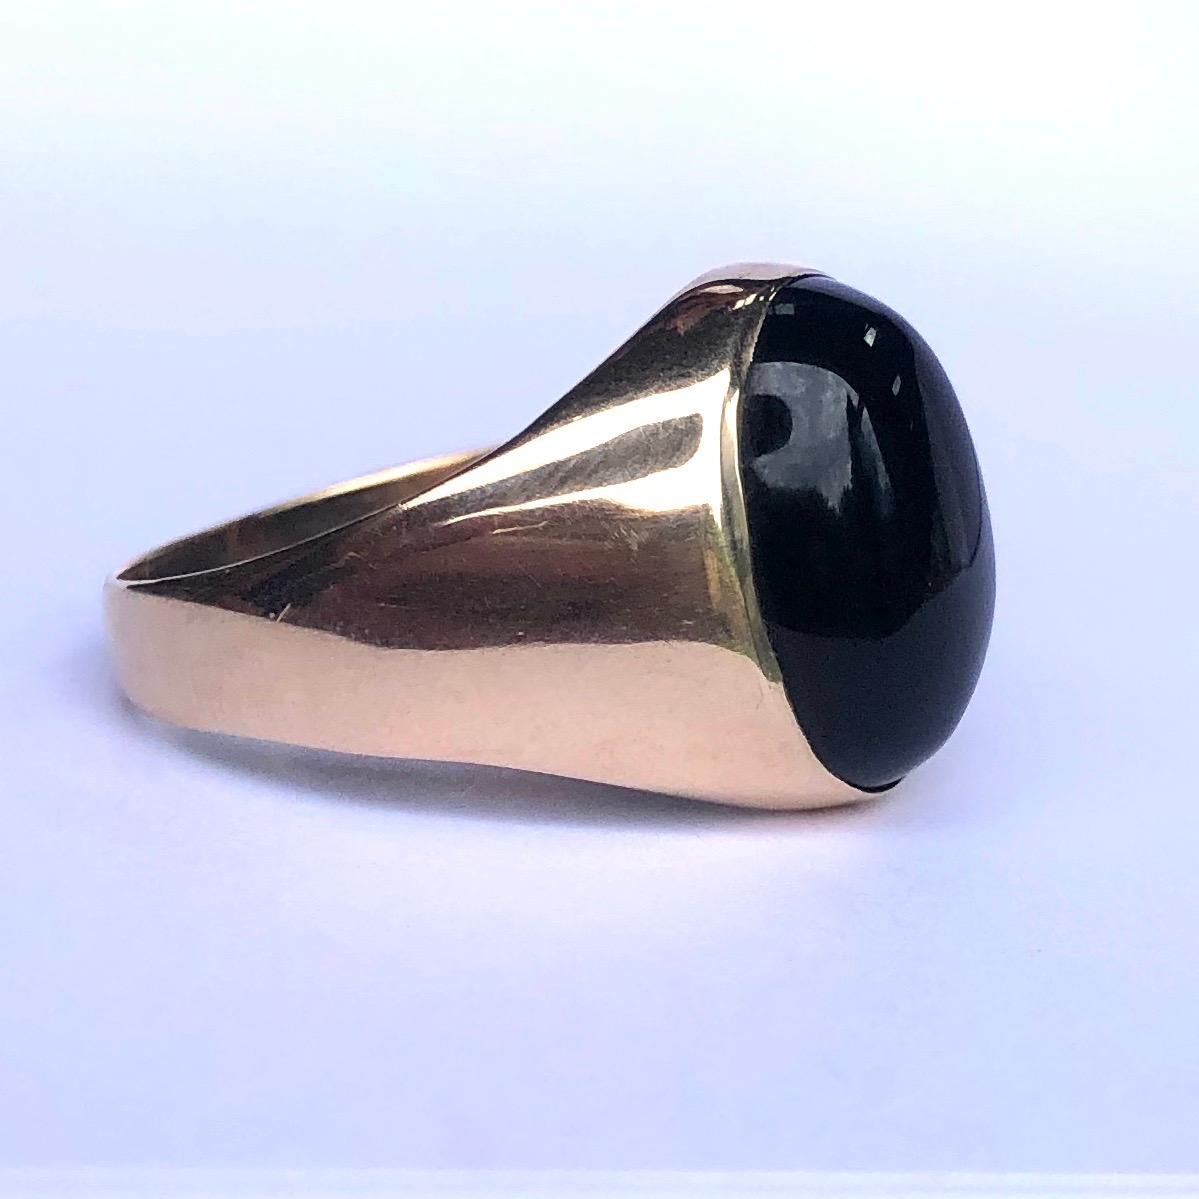 The large onyx cabochon stone in this ring is so glossy and beautiful and complimented buy the 9ct yellow gold. 

Ring Size: X or 11 1/2 
Stone Dimensions: 16x11mm 
Height Off Finger: 7mm

Weight: 7.3g